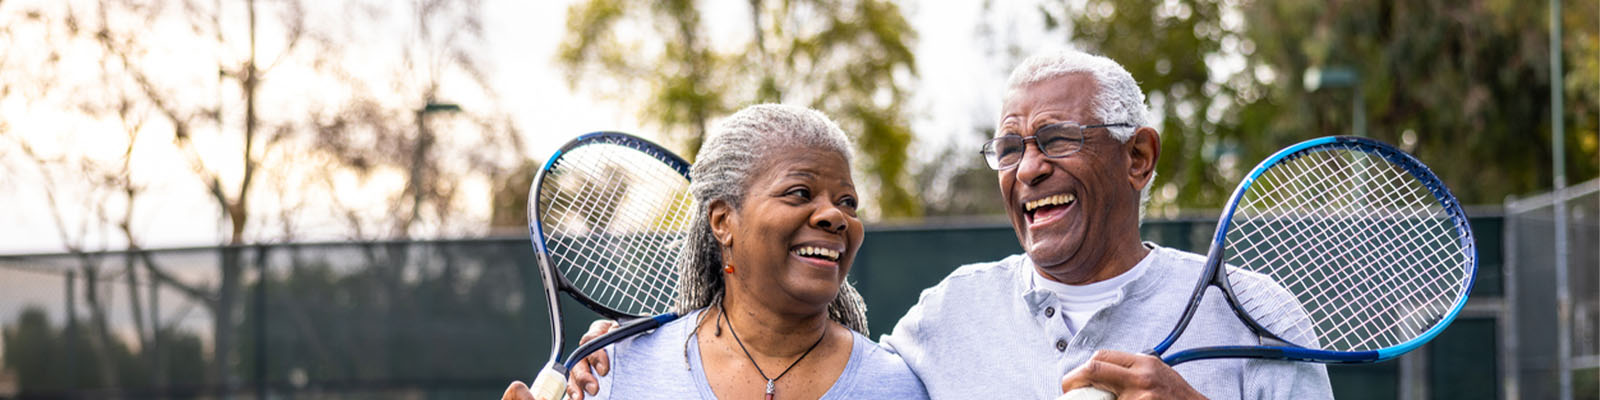 An elderly senior living couple standing on a tennis court holding tennis rackets while smiling